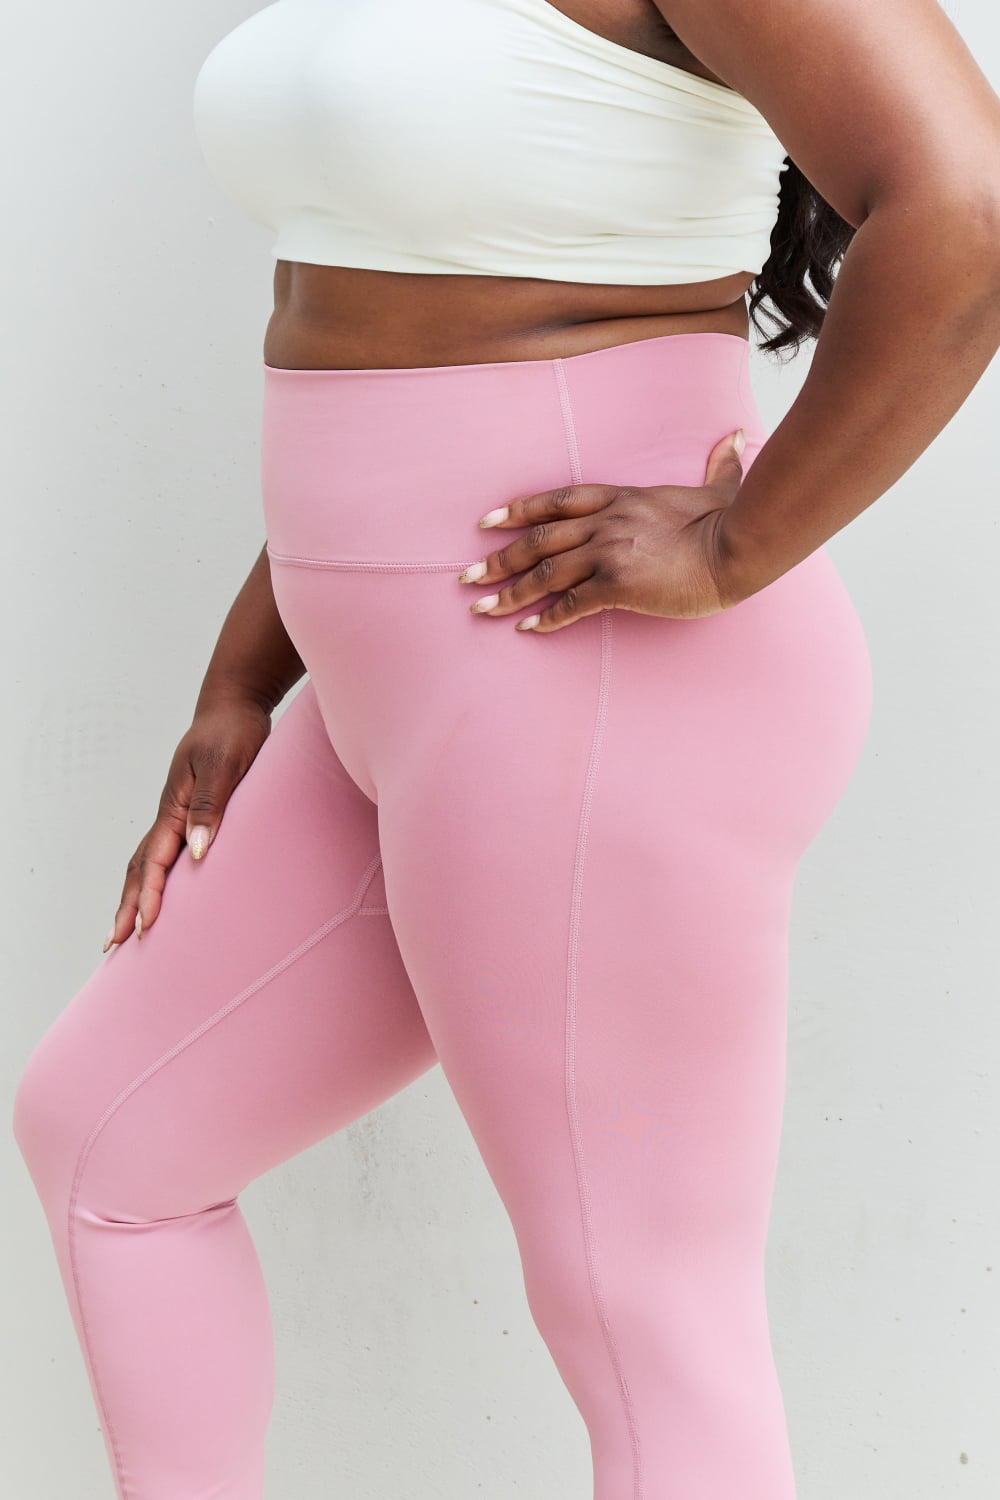 Fit For You Full Size High Waist Active Leggings in Light Rose - Women’s Clothing & Accessories - Activewear - 11 - 2024